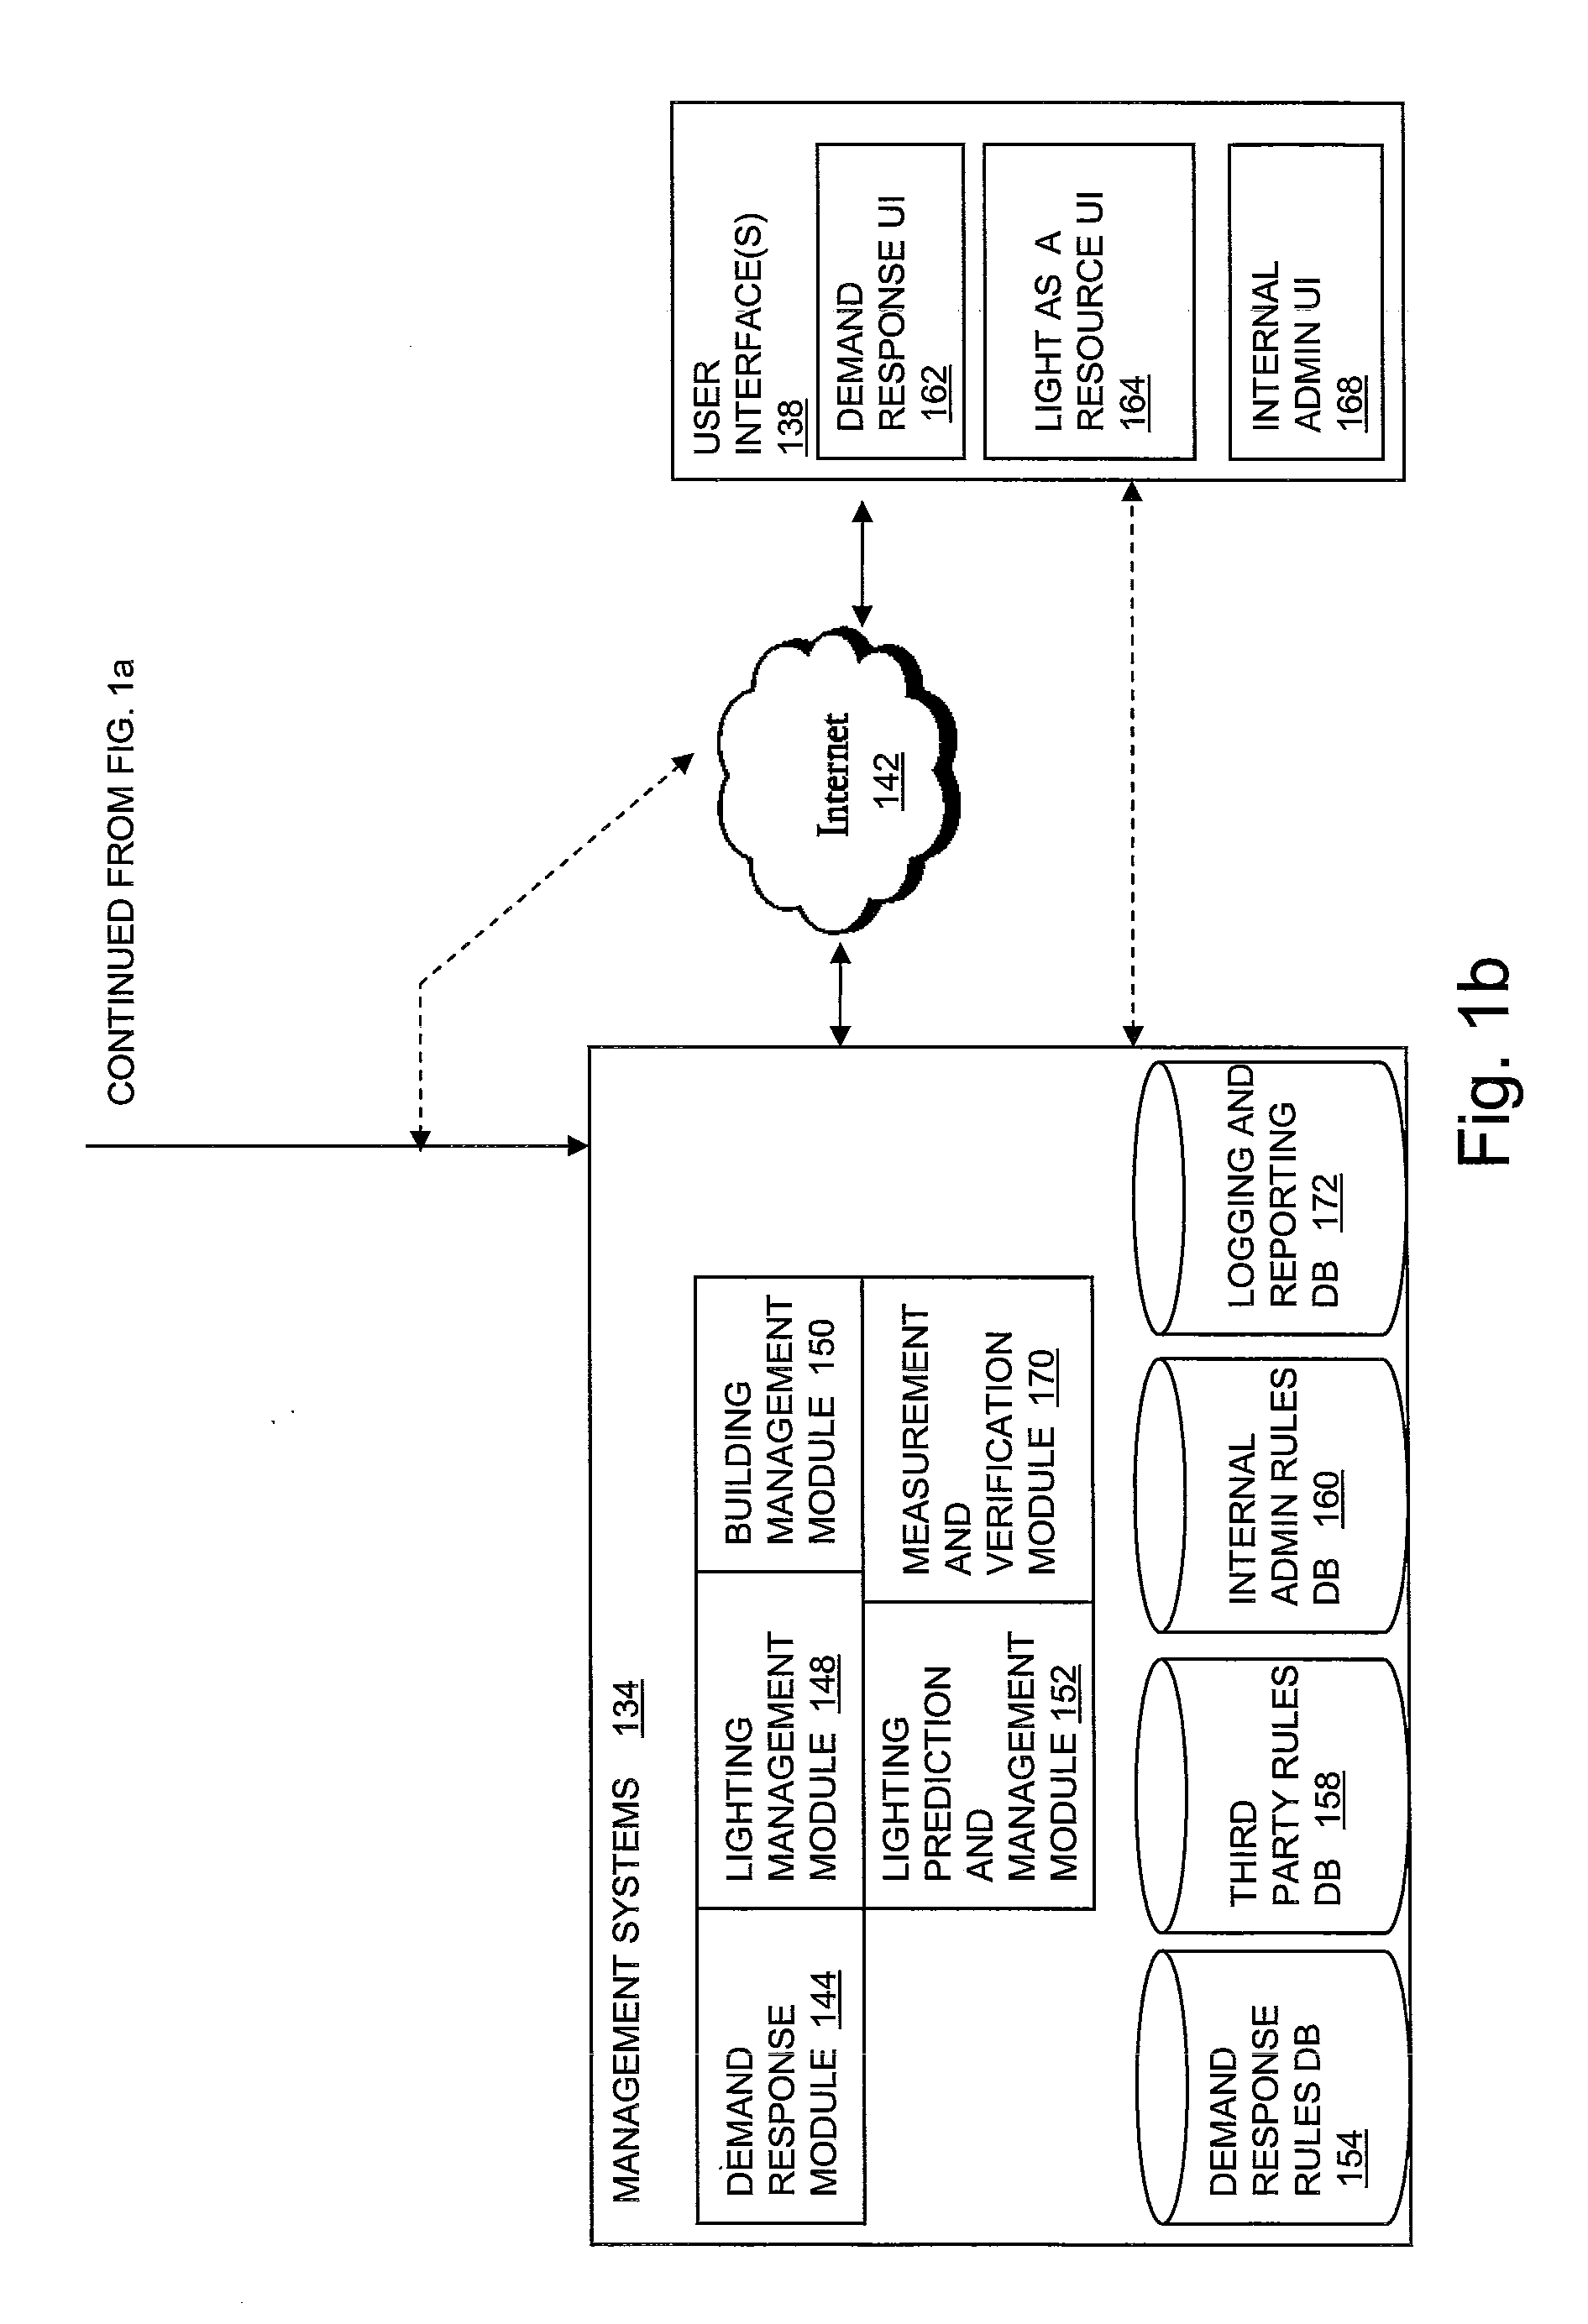 Power Management Unit with Adaptive Dimming